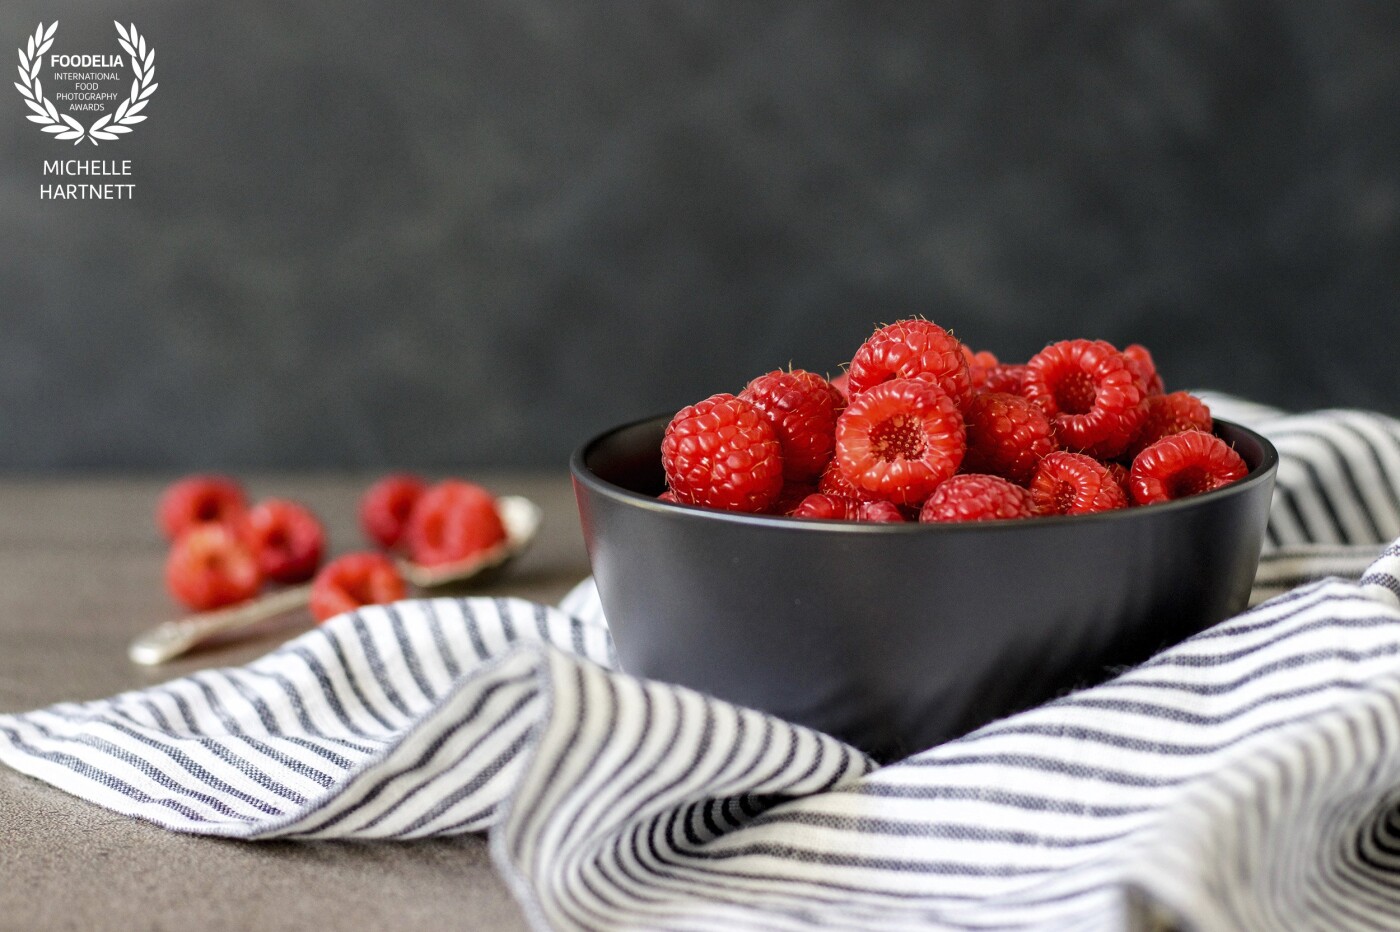 Being a country girl, my camera is often pointed in the direction of raw, farm-fresh, just-picked ingredients so when I spotted these beautiful raspberries at my local Farmers Market they were definitely something I wanted to bring home and photograph. I've contrasted them here with my hand-painted background and dark bowl to make that gorgeous, vibrant red colour really pop! Shot with my Canon 50mm lens.  